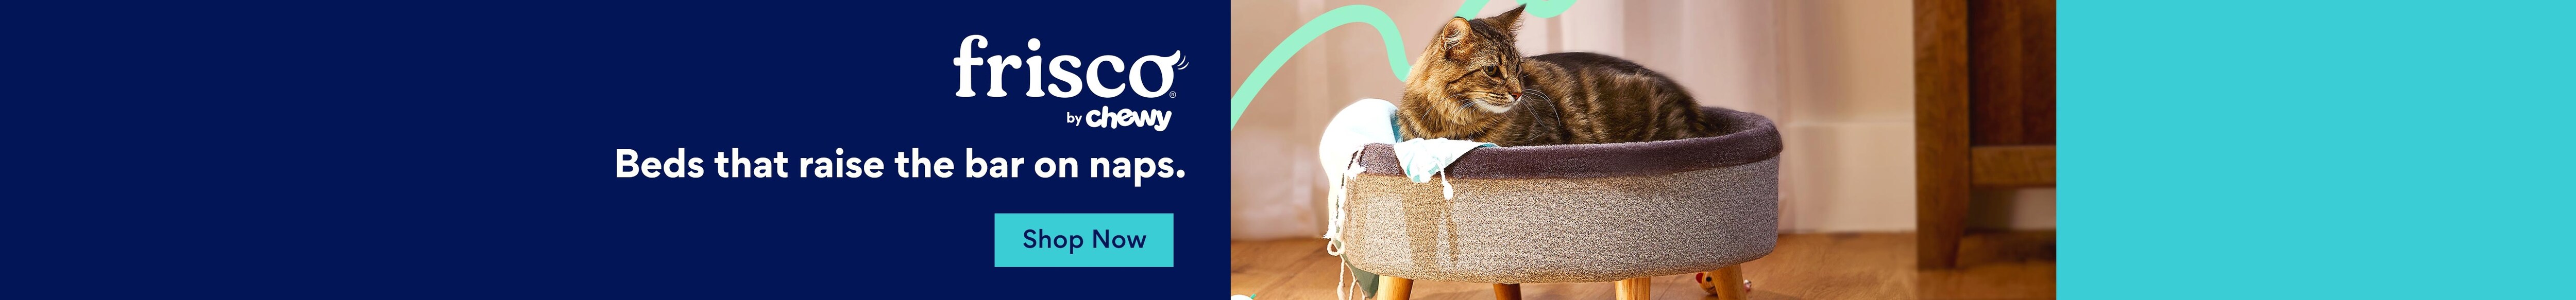 Frisco by Chewy. Beds that raise the bar on naps. Shop Now.